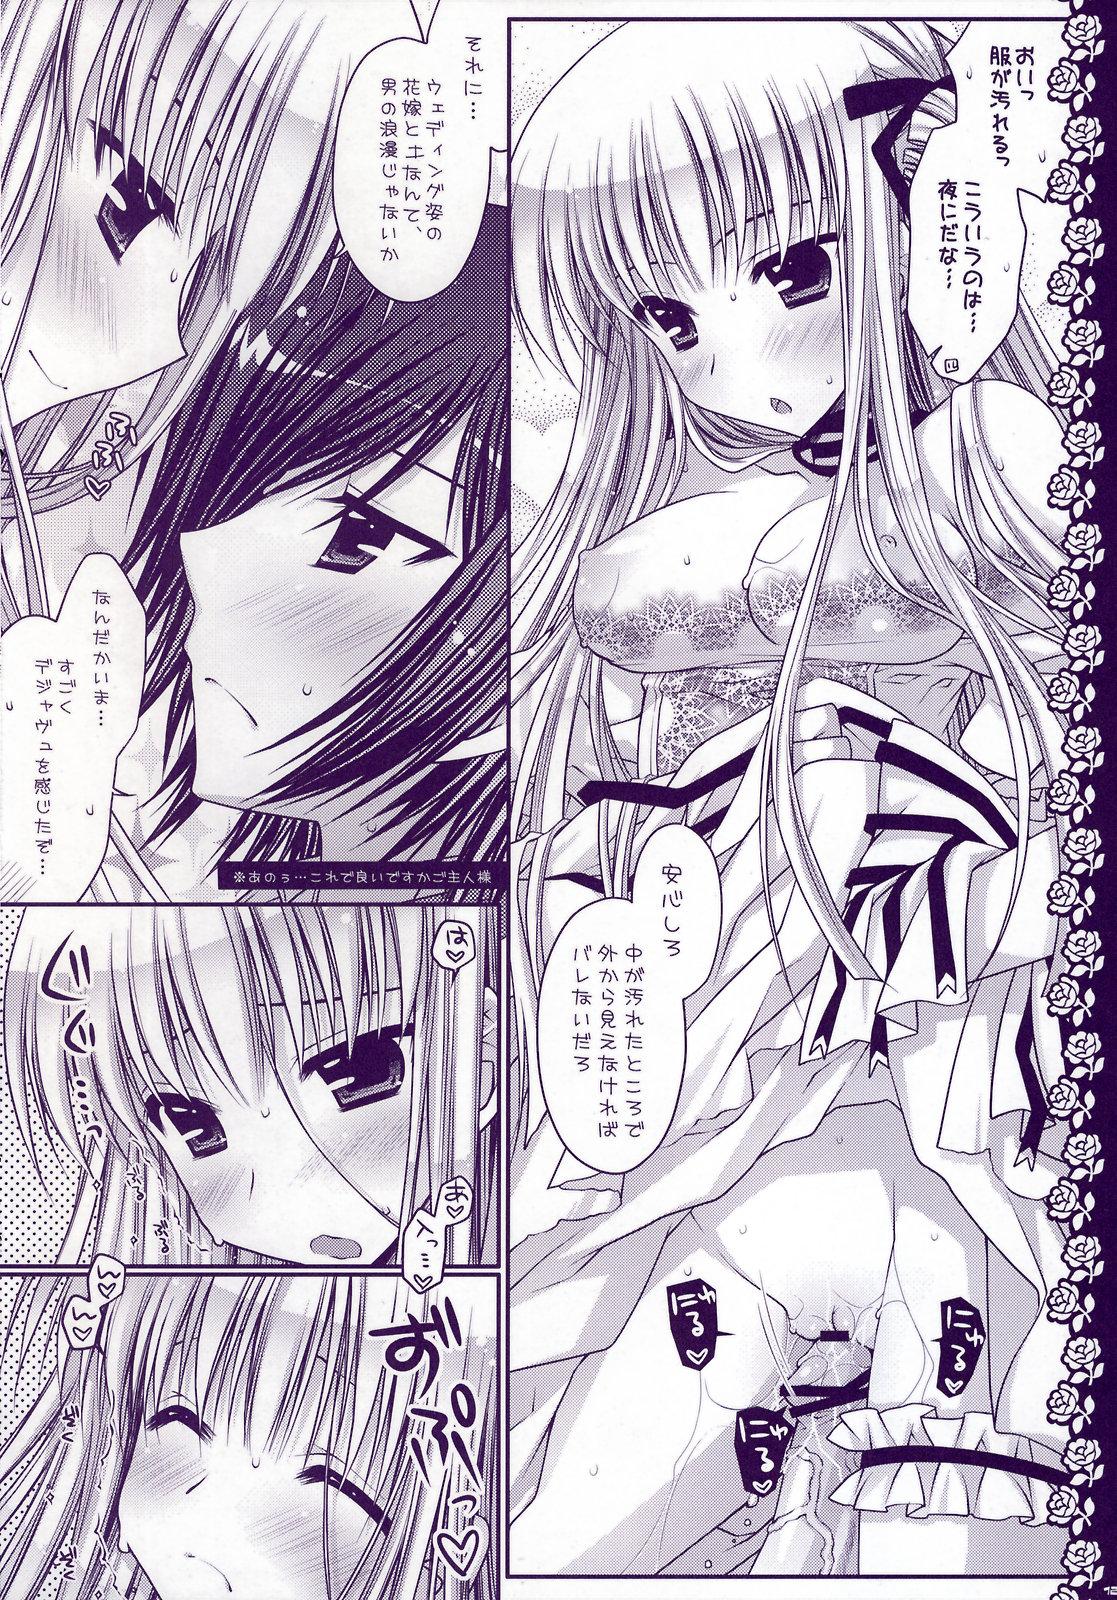 Top HAPPY WEDDING - Code geass Awesome - Page 12